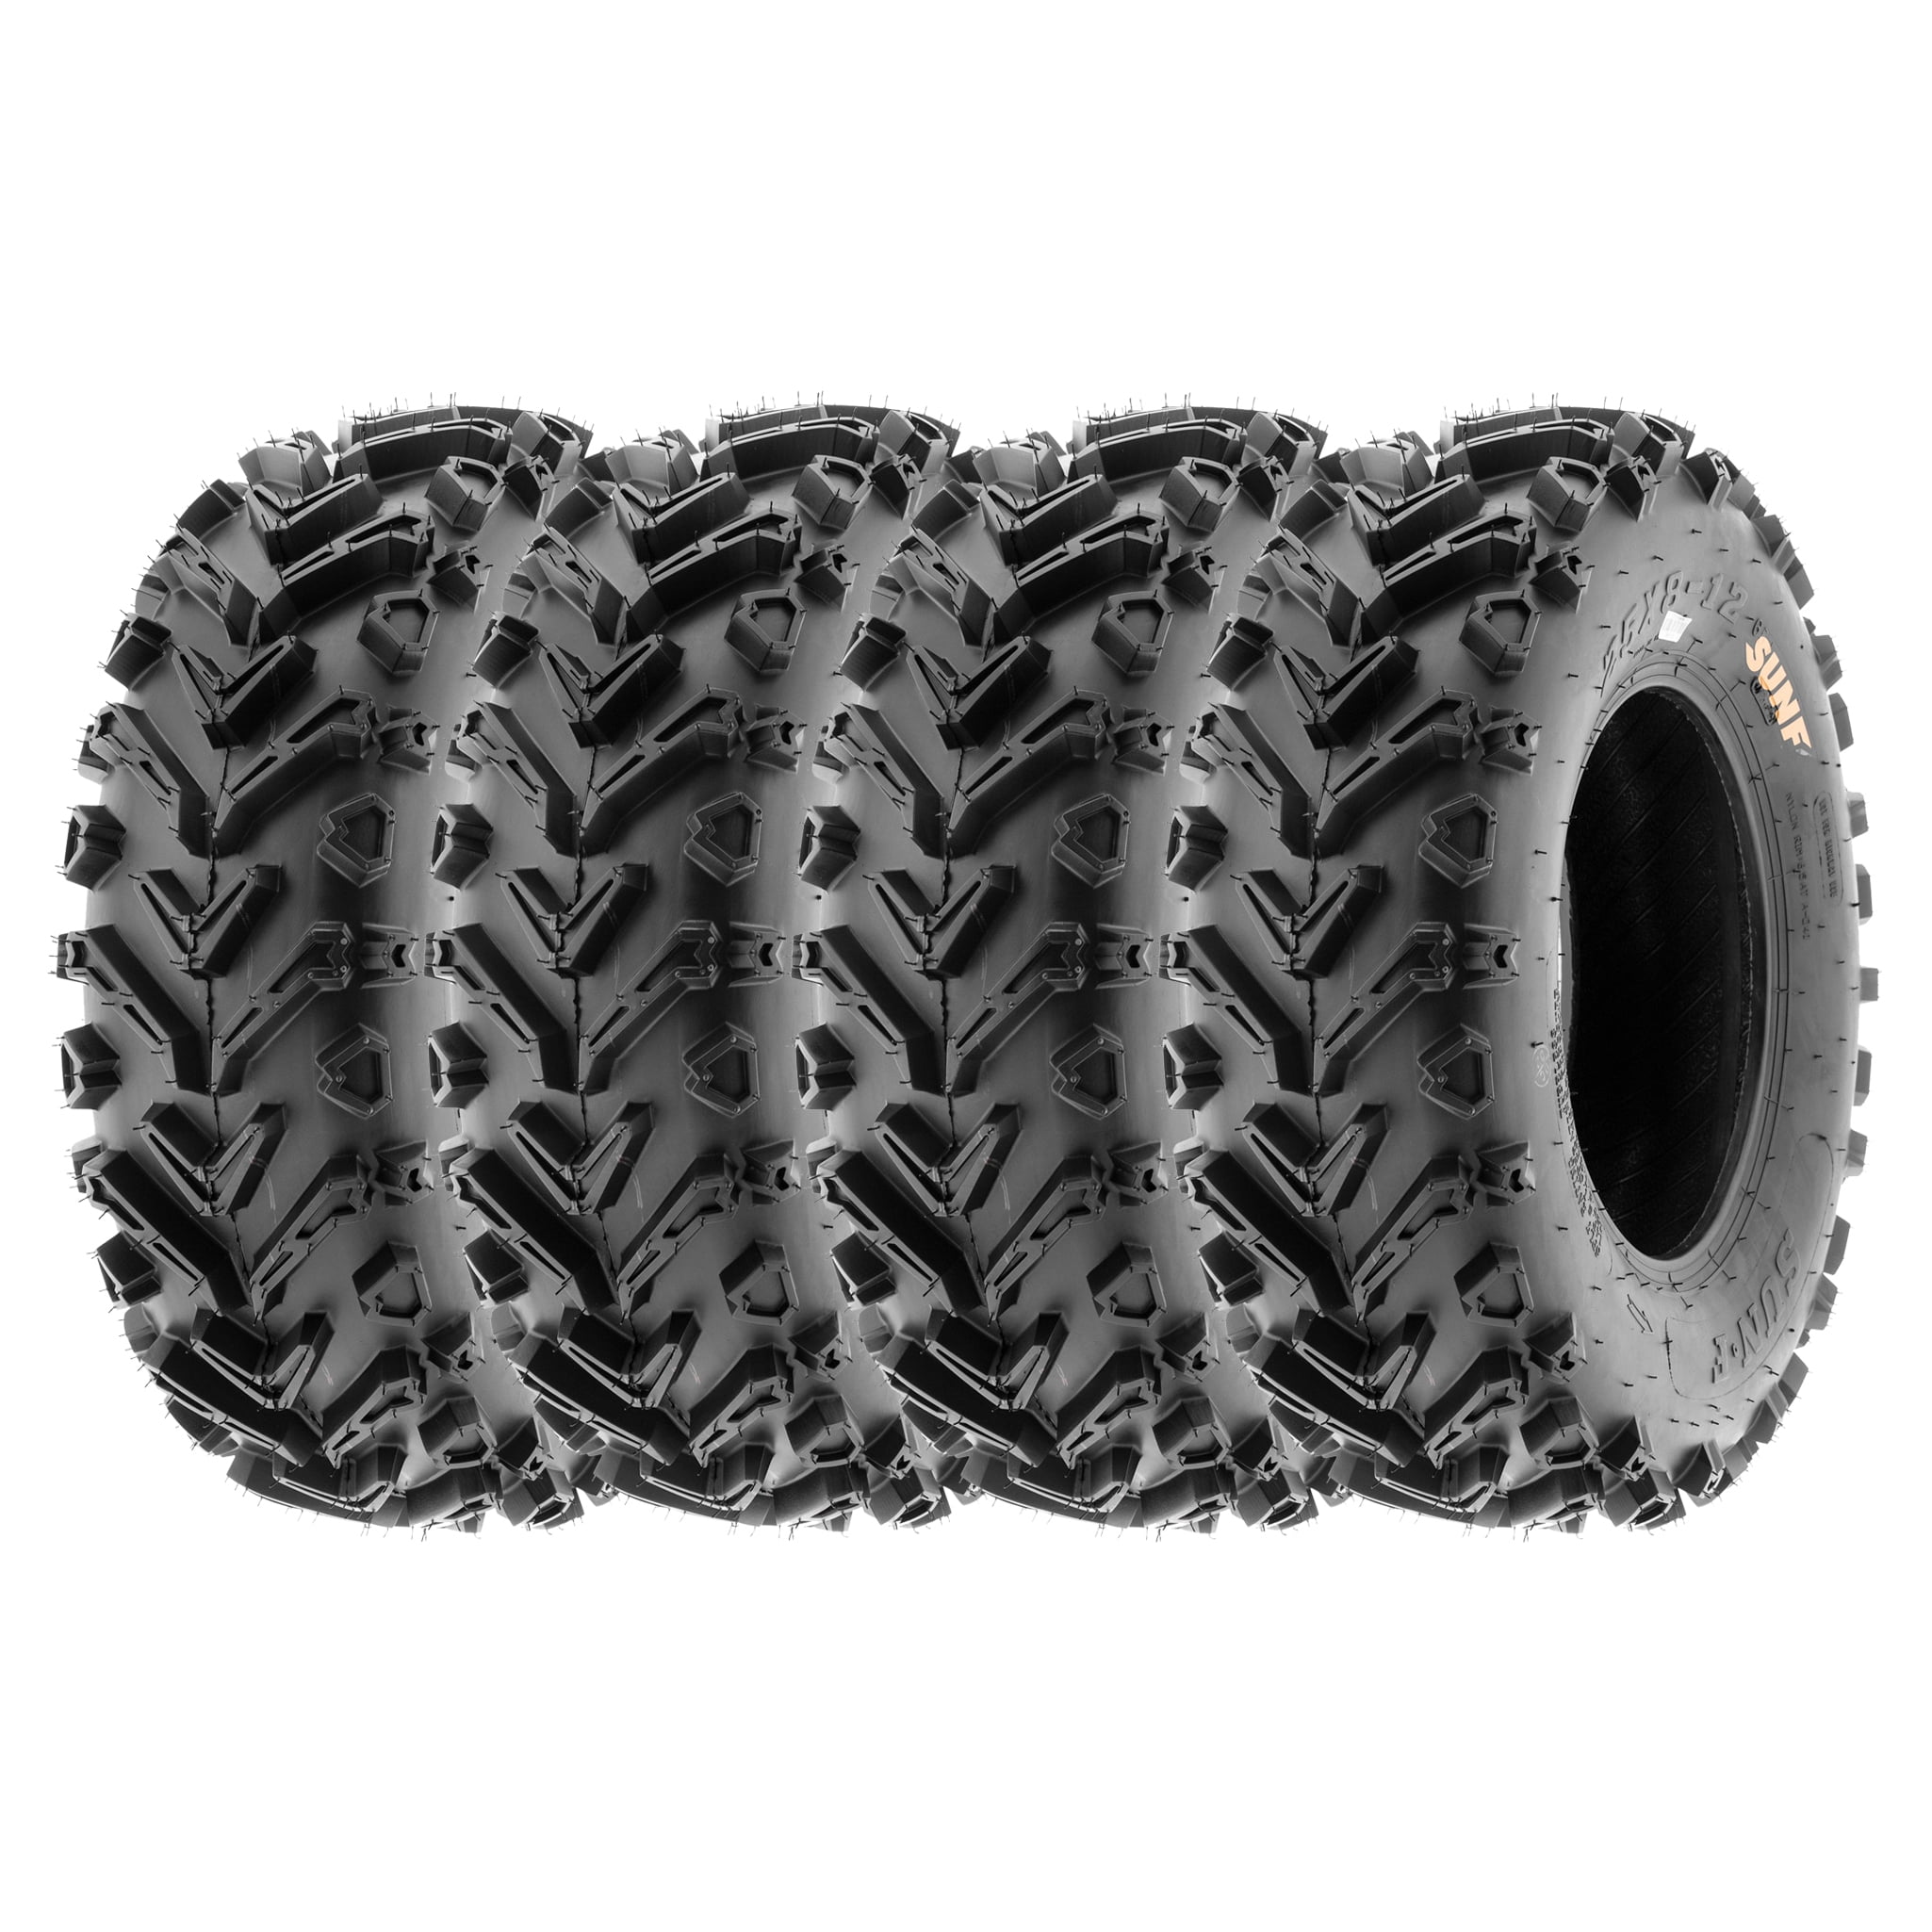 SUPERGUIDER Set of 2 24x8-12 ATV Tires 24x8x12 24-8-12 6 Ply Tubeless 